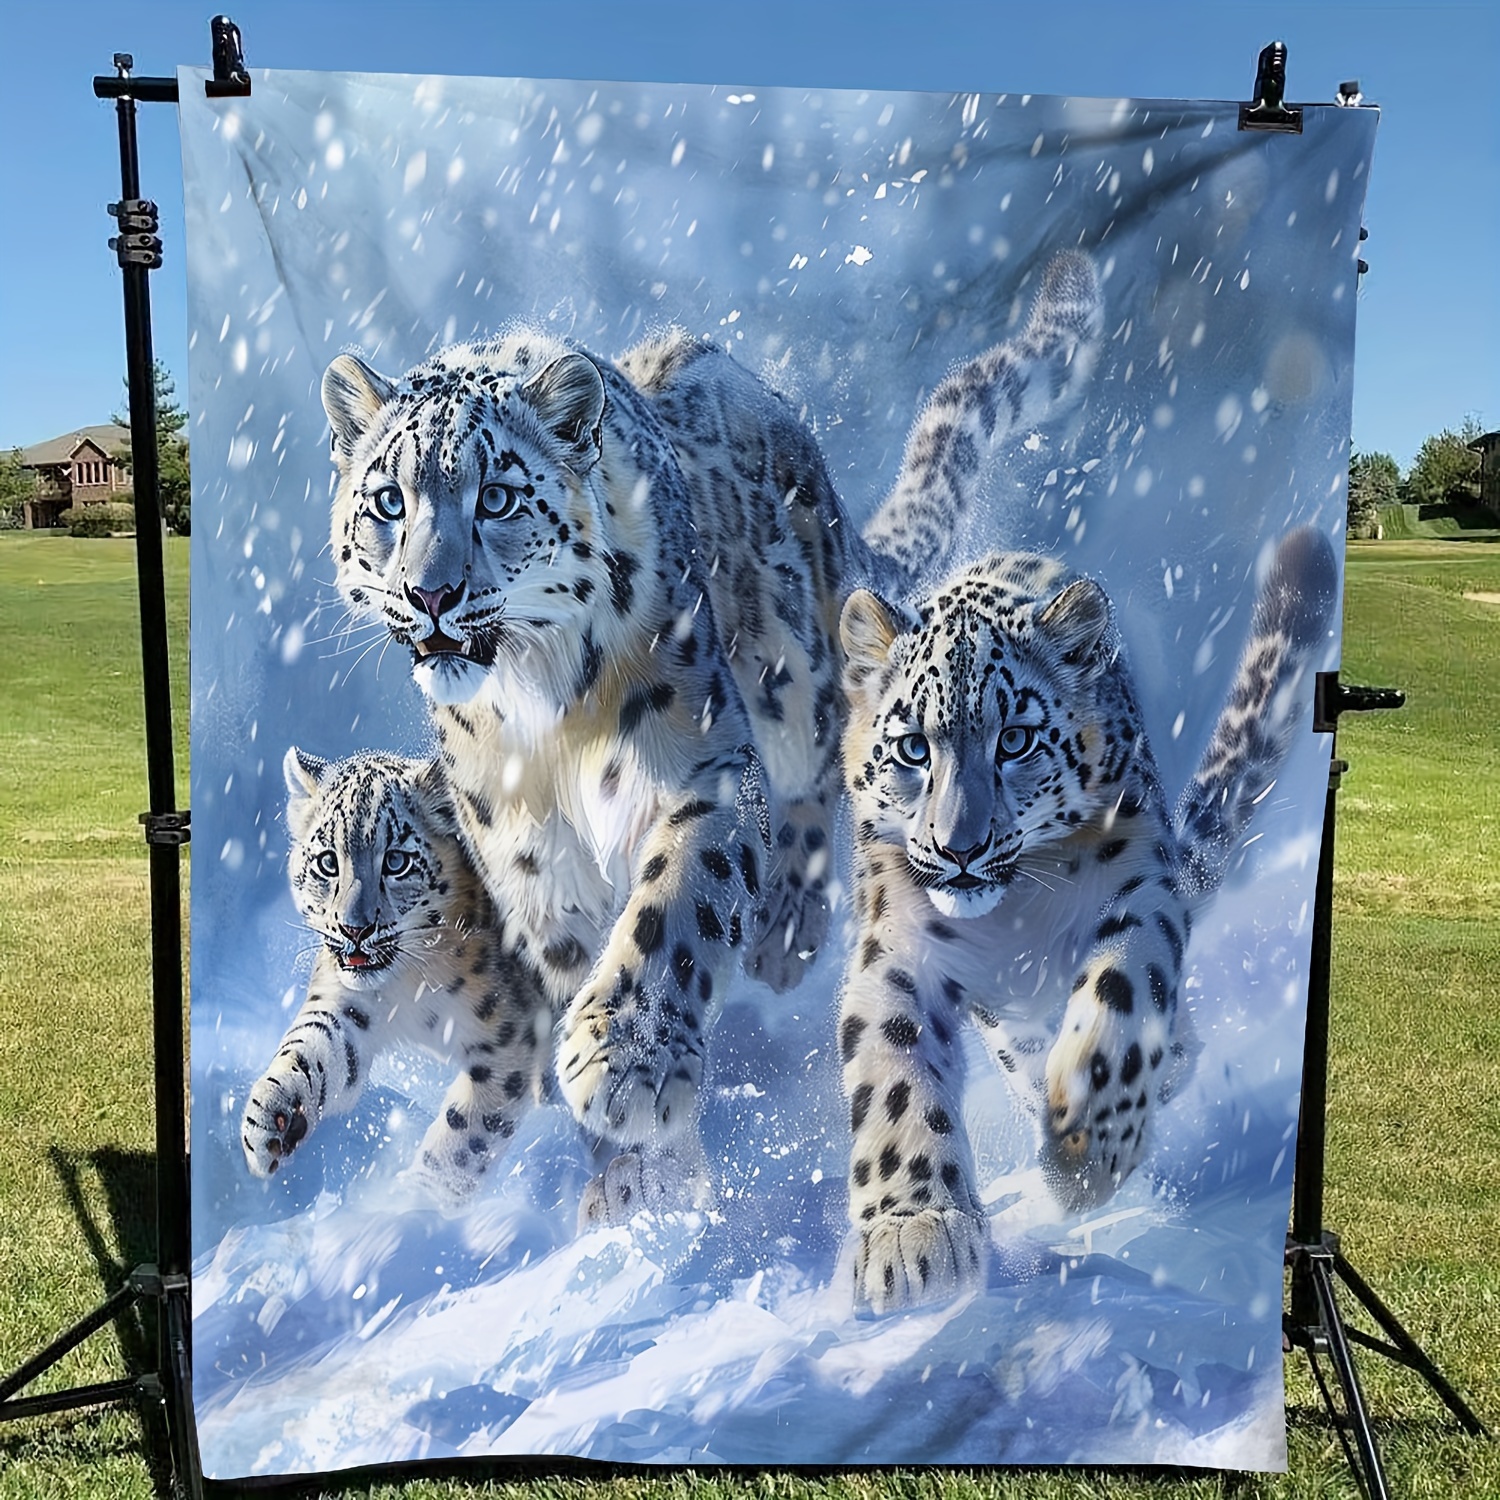 

Cozy Snow Leopard Print Flannel Throw Blanket - Soft, Warm, And Perfect For Couch, Bed, Office, Or Travel - Ideal Gift For Friends Leopard Print Blanket Cozy Blanket